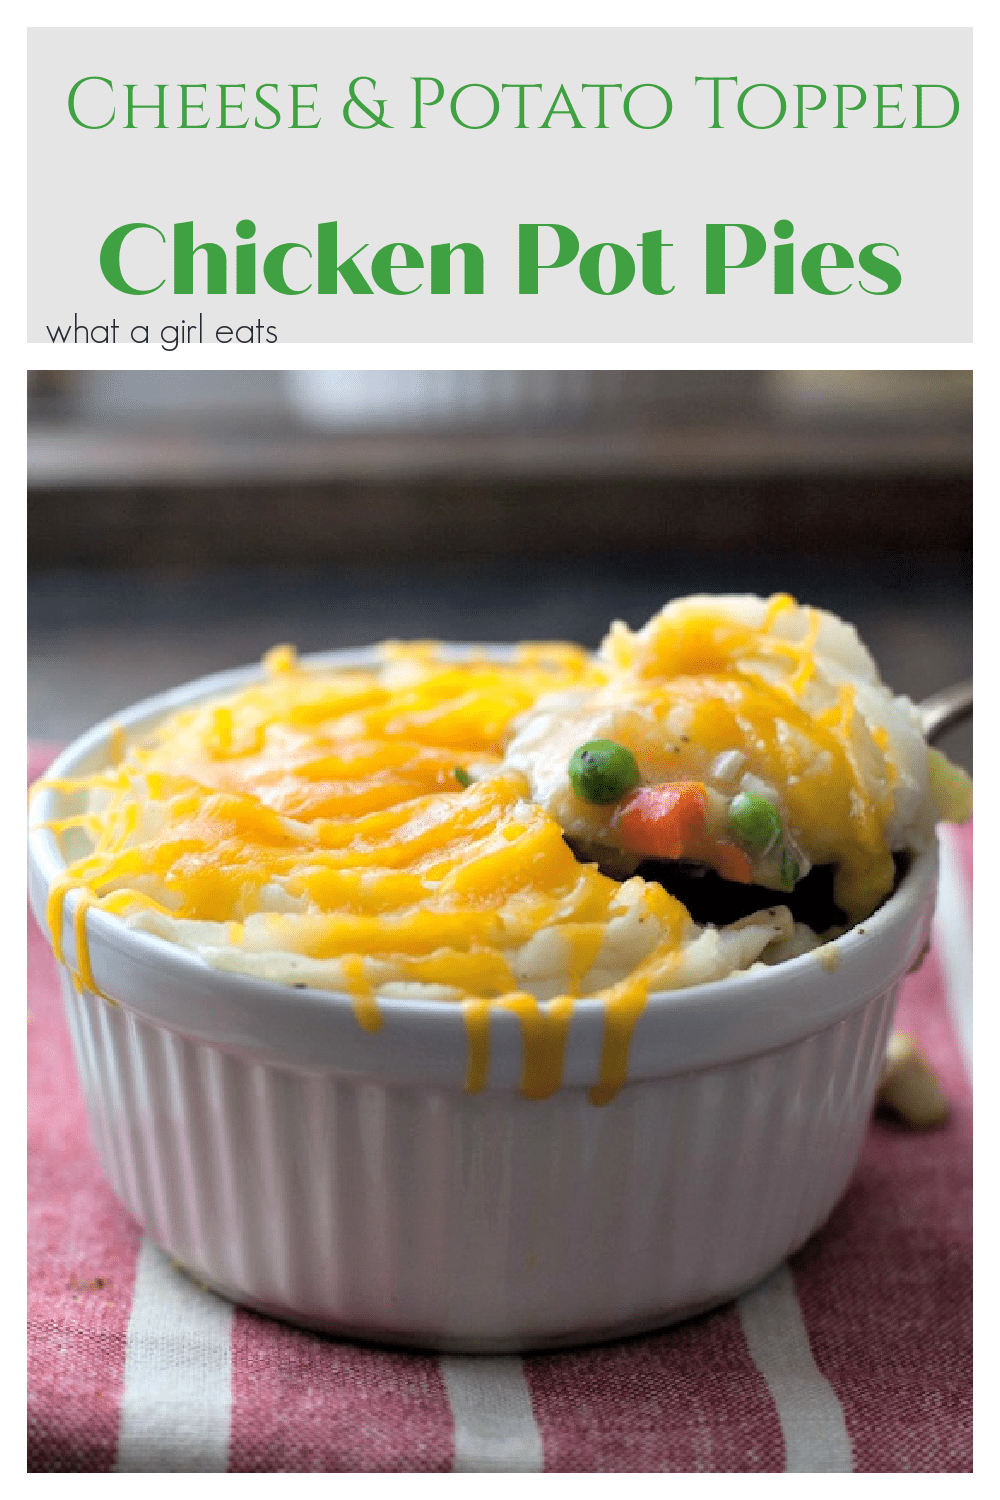 Cheesy potato-crusted chicken pot pies ﻿are pure comfort food. Chicken and vegetables, simmered in a rich gravy with a cheddar potato crust.